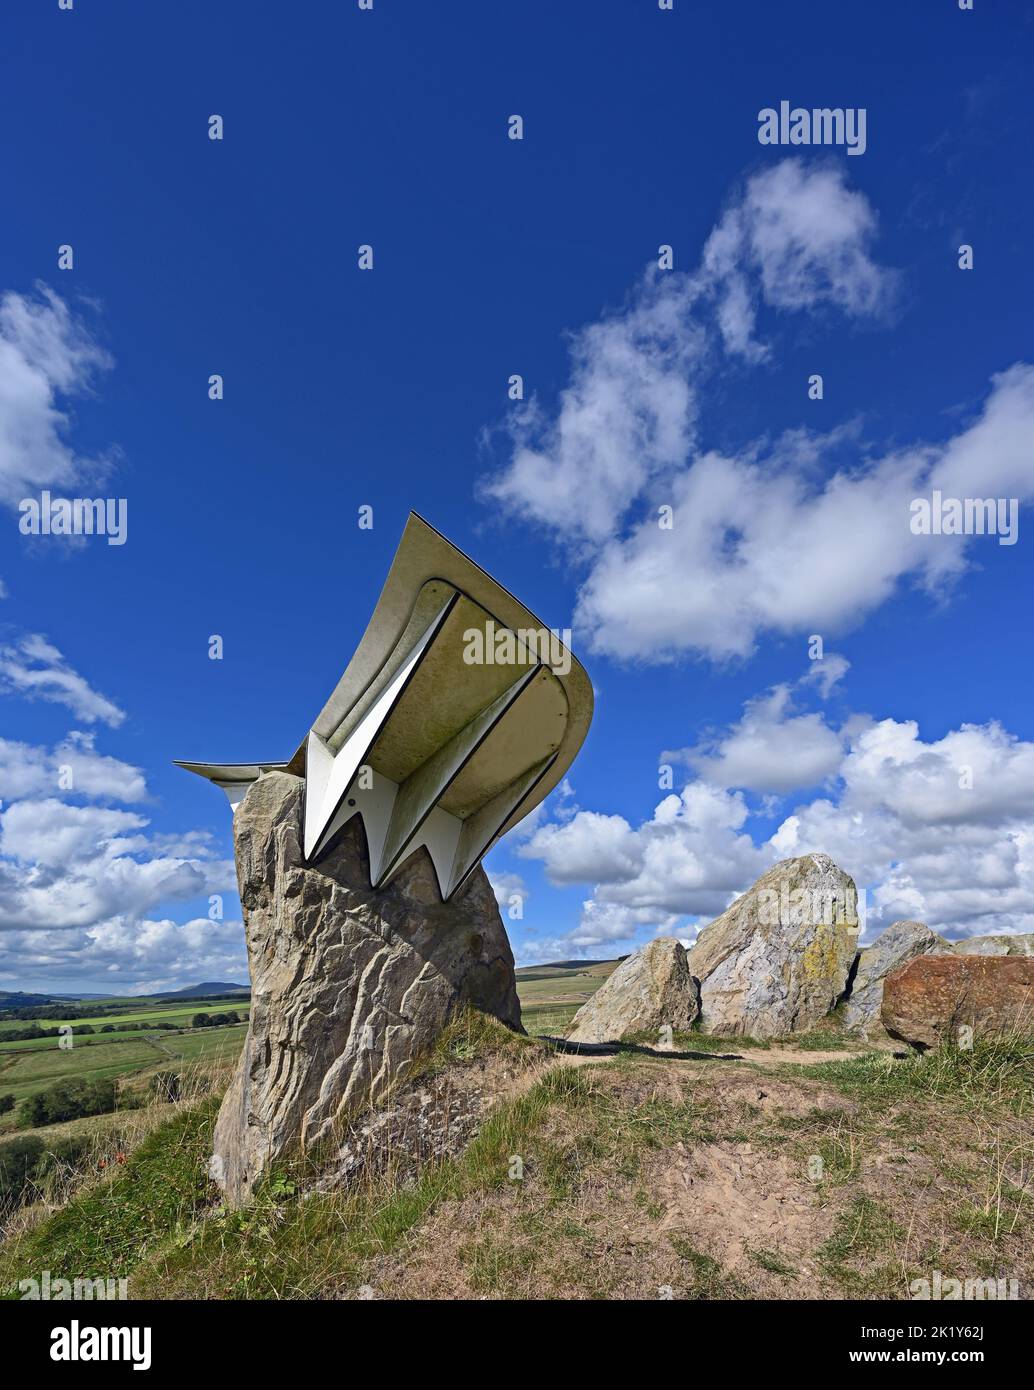 'Belvedere'. outdoor artwork by Charles Jencks. Crawick Multiverse, Sanquhar, Dumfries and Galloway, Scotland, United Kingdom, Europe. Stock Photo